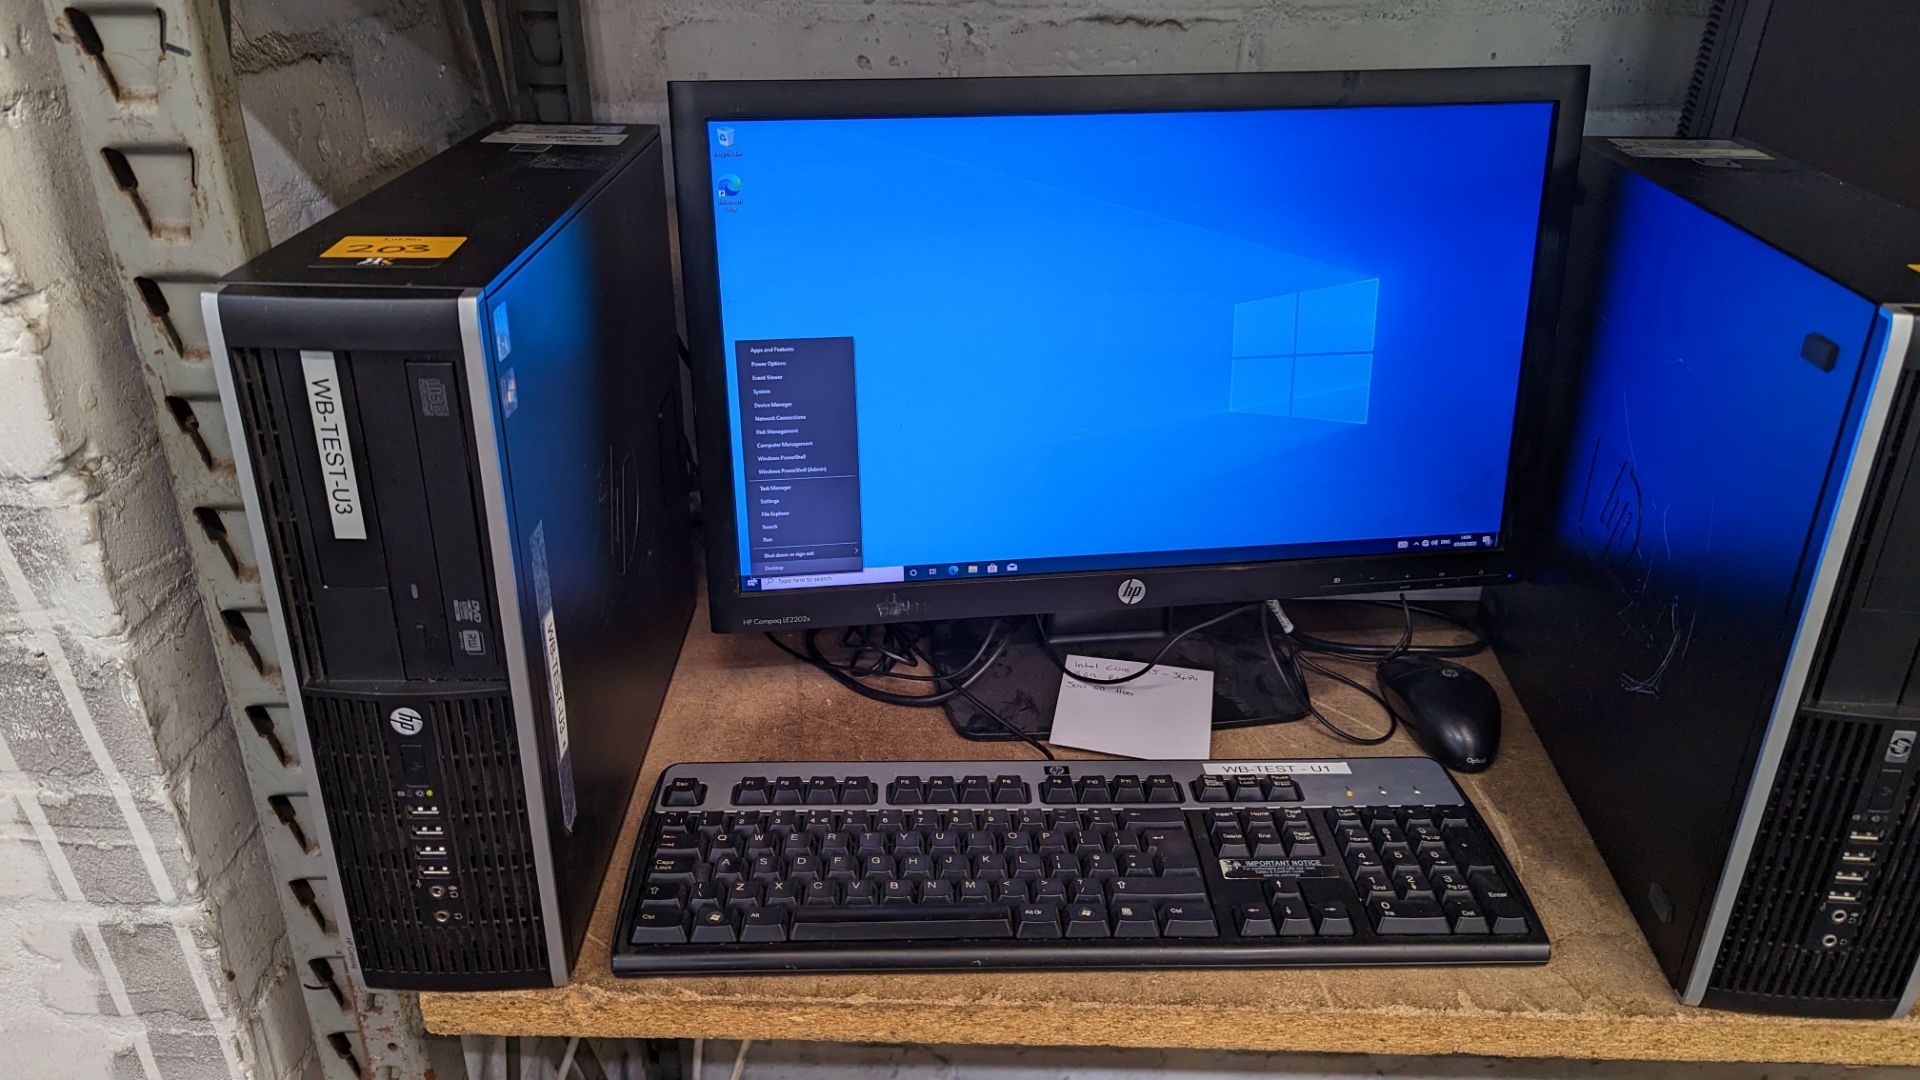 HP 8100 Elite small form factor computer with with Intel Core i5-3470 CPU, 8GM RAM, 500GB HDD, inclu - Image 2 of 7